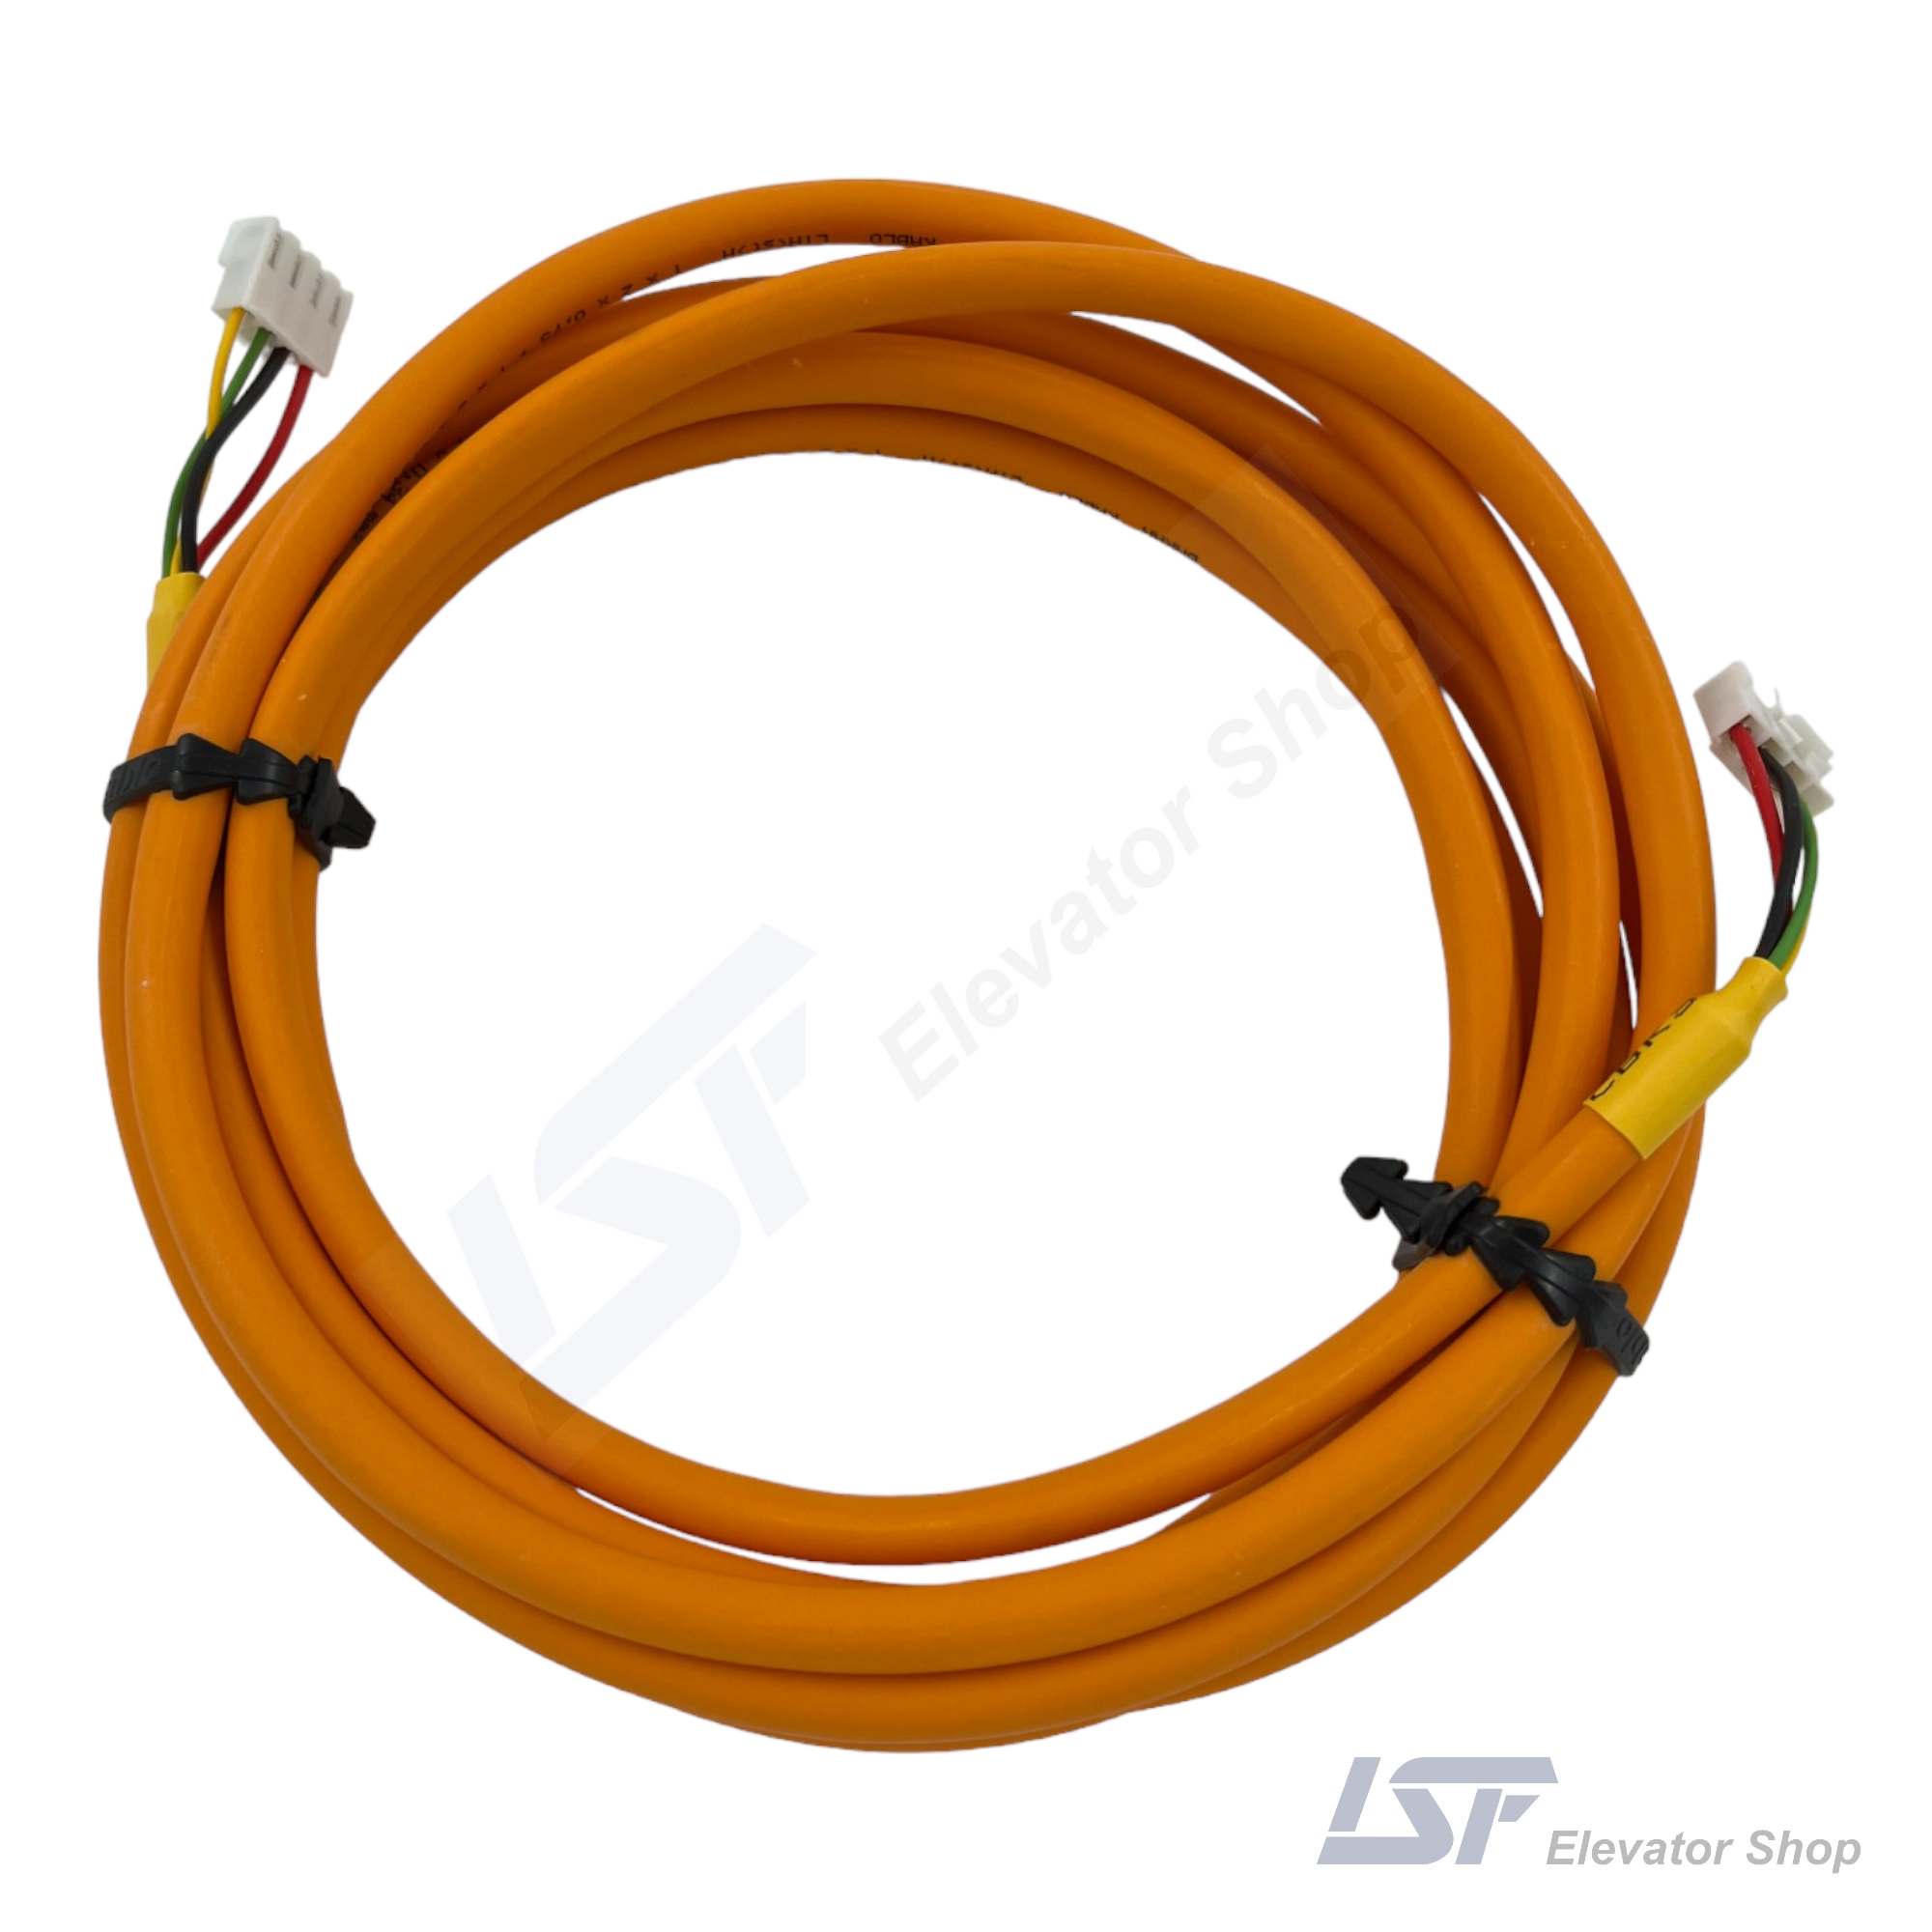 ARKEL 02 1002485 KBL-CBK3 Can-bus Cable 3.3 m. (Main Line - 3.96 mm connector)